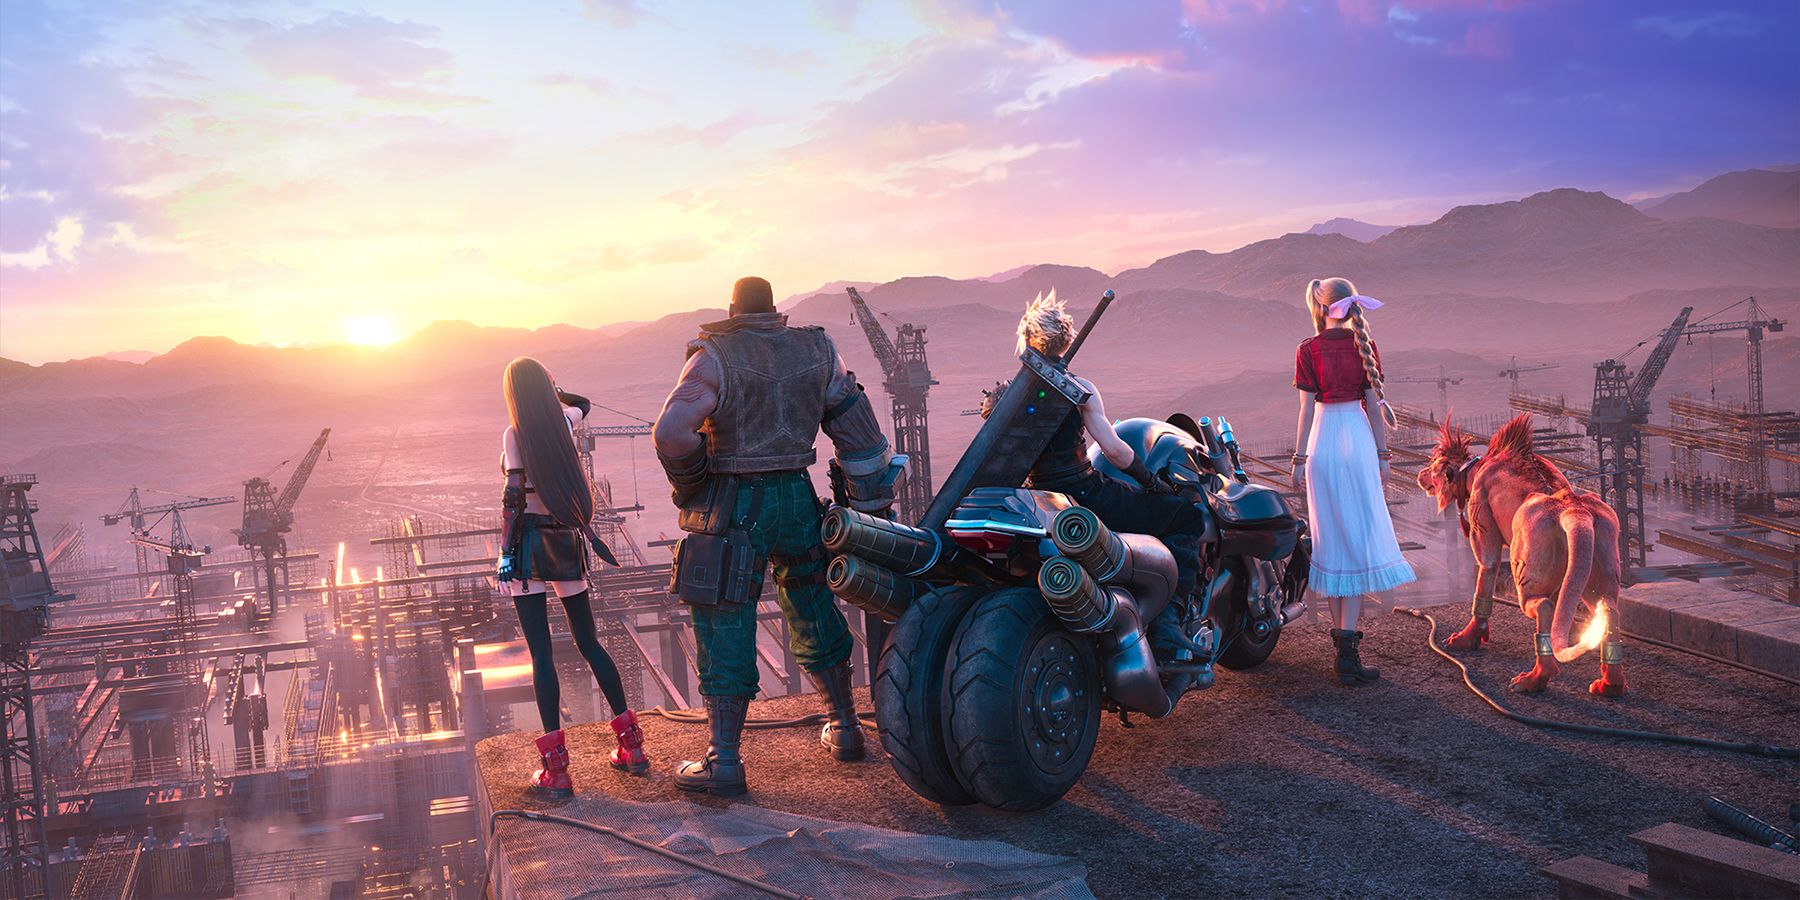 Cloud and friends looking out at the sunset in Final Fantasy 7 Remake